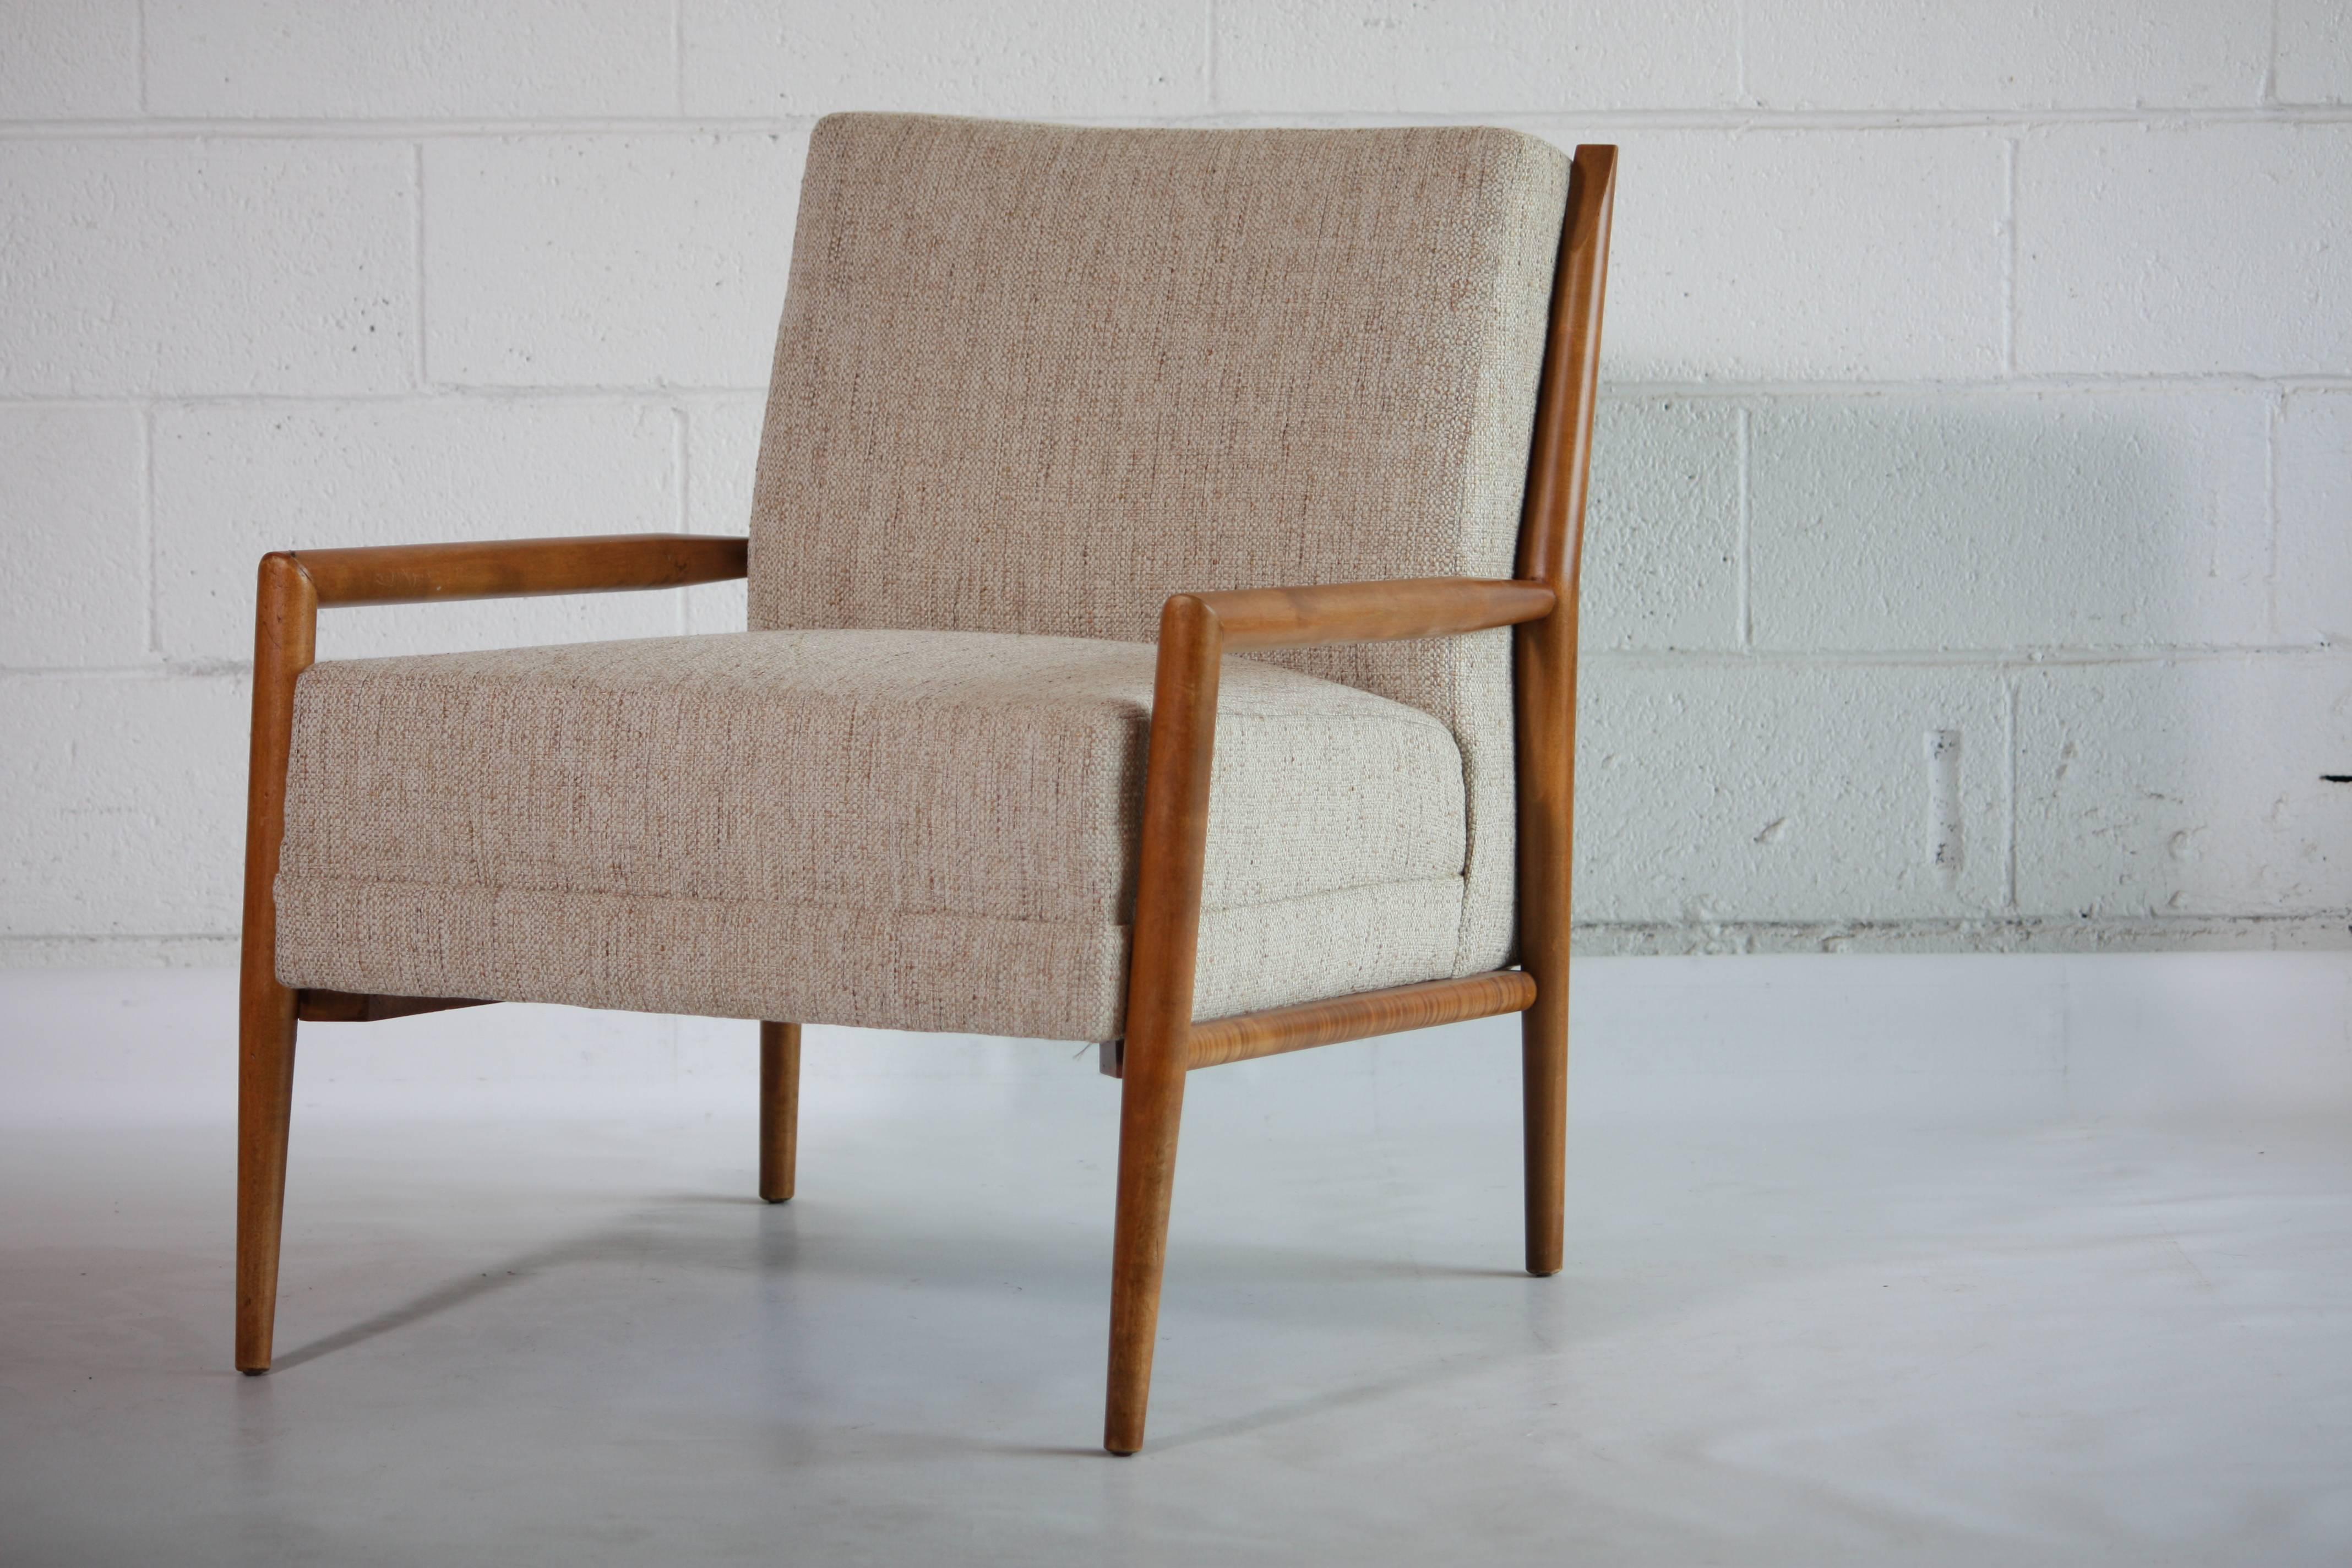 Planner Group lounge chair by Paul McCobb for Winchendon. Pictured with travertine clover leaf side table and vase for scale.